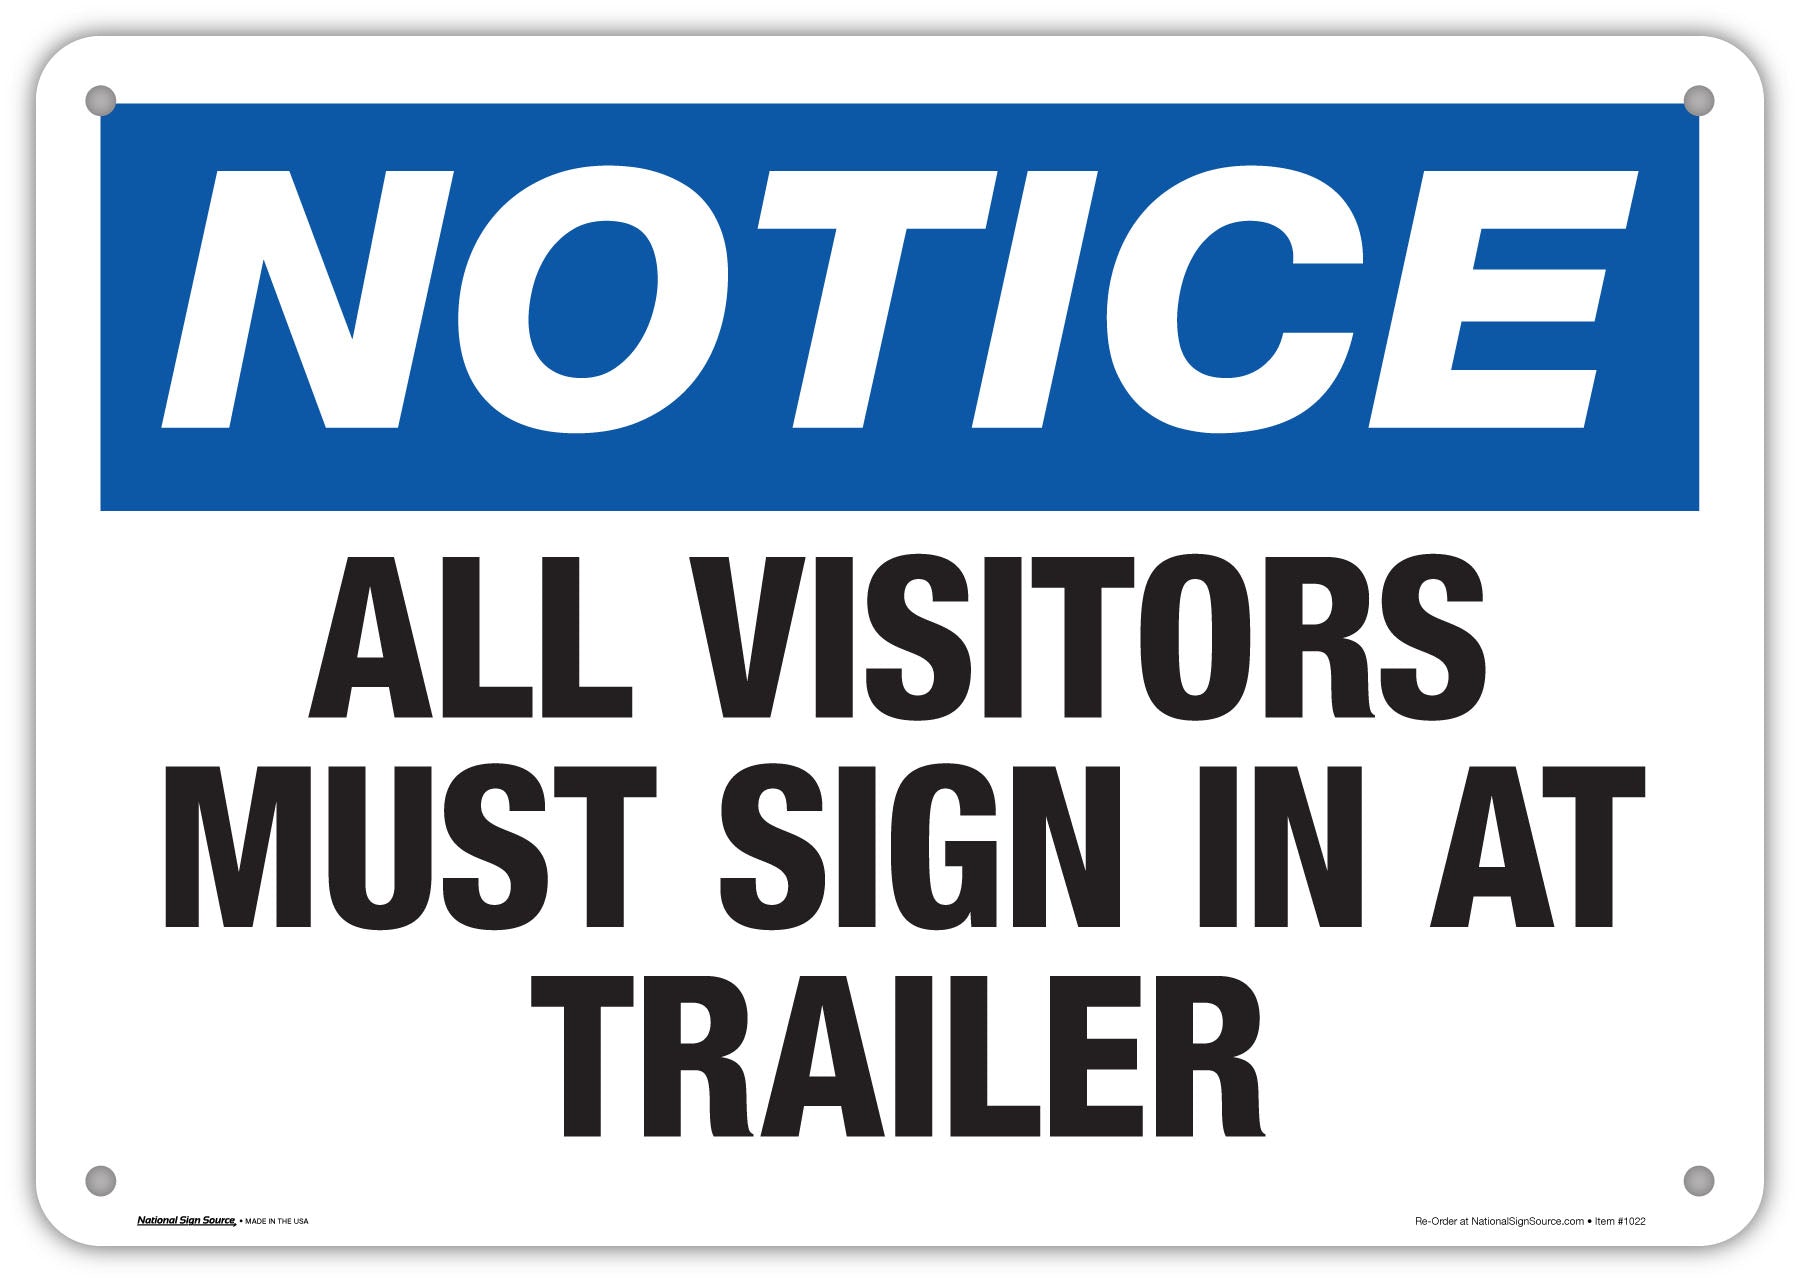 Notice, all visitors must sign in at trailer, aluminum signs and vinyl sticker signs.